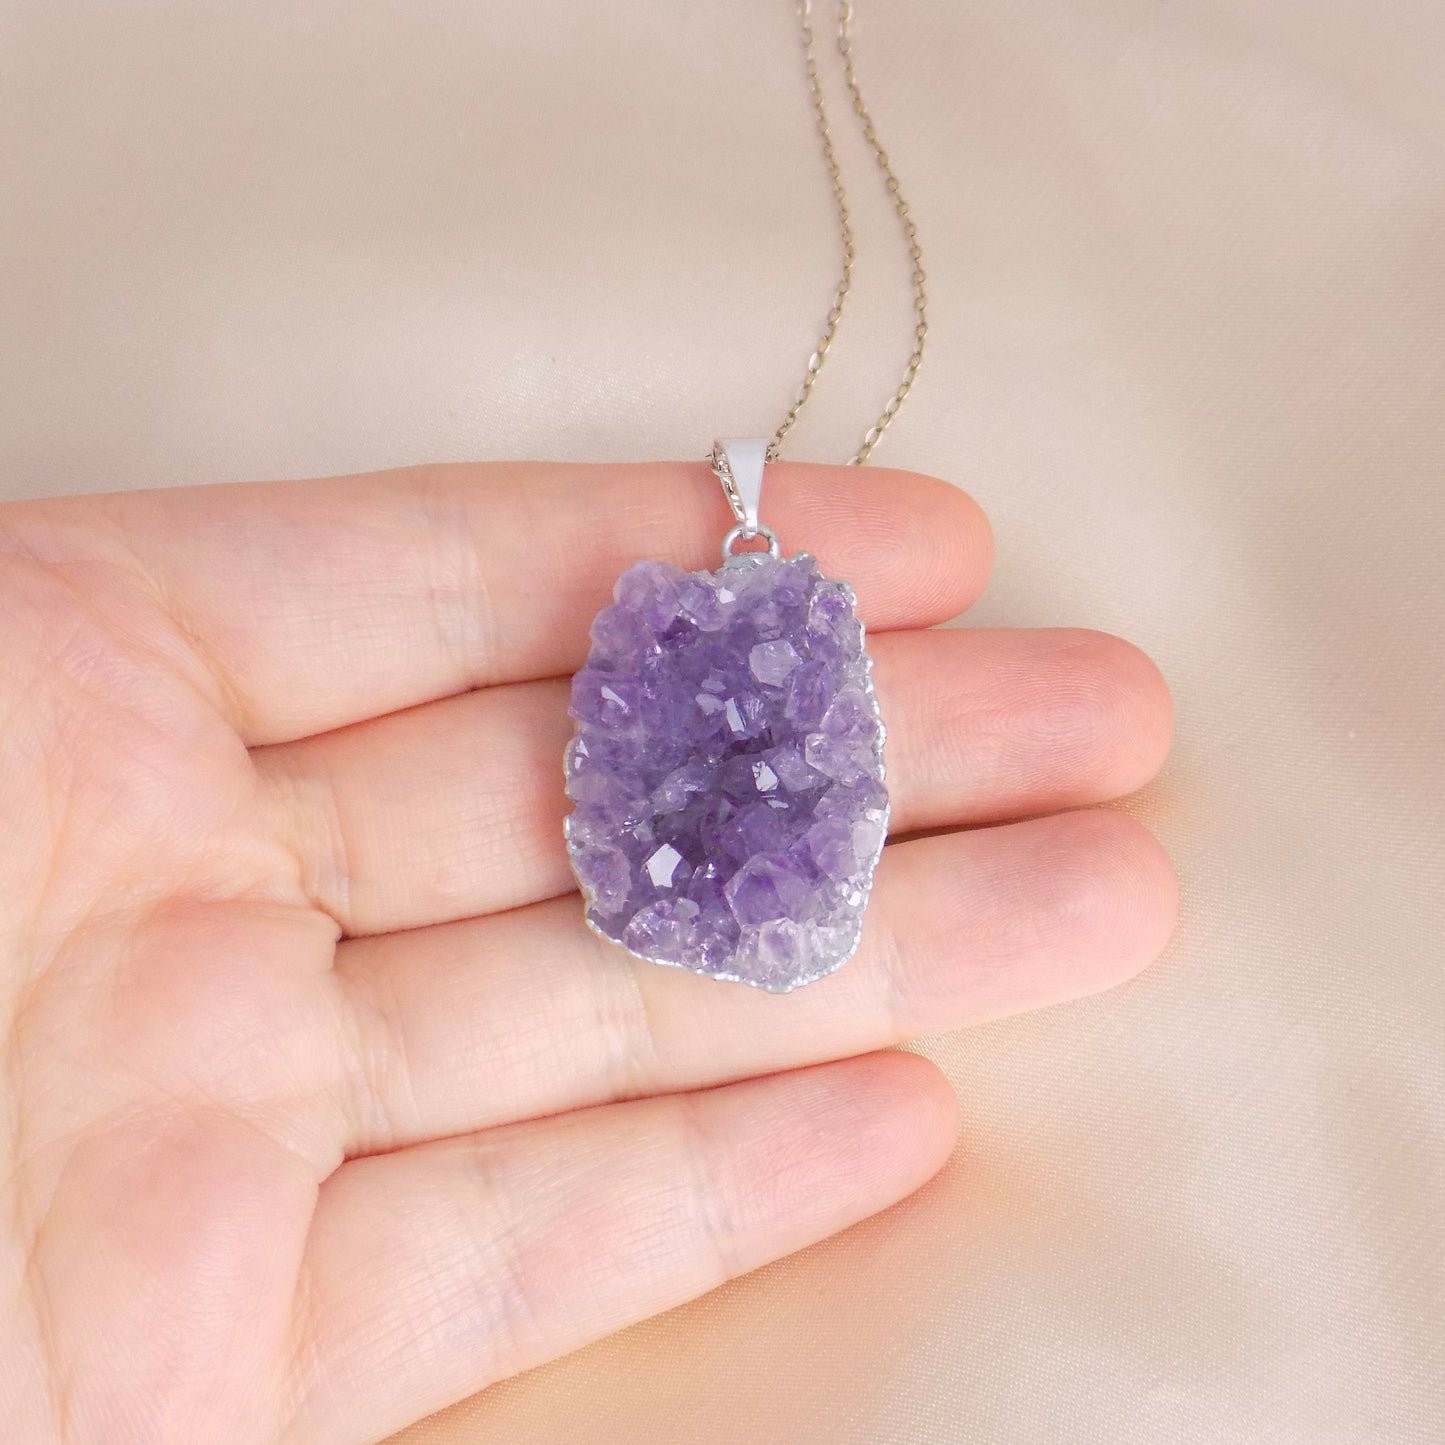 Purple Amethyst Druzy Crystal Necklace with Sterling Silver Chain, Boho Christmas Gifts For Her, R14-44